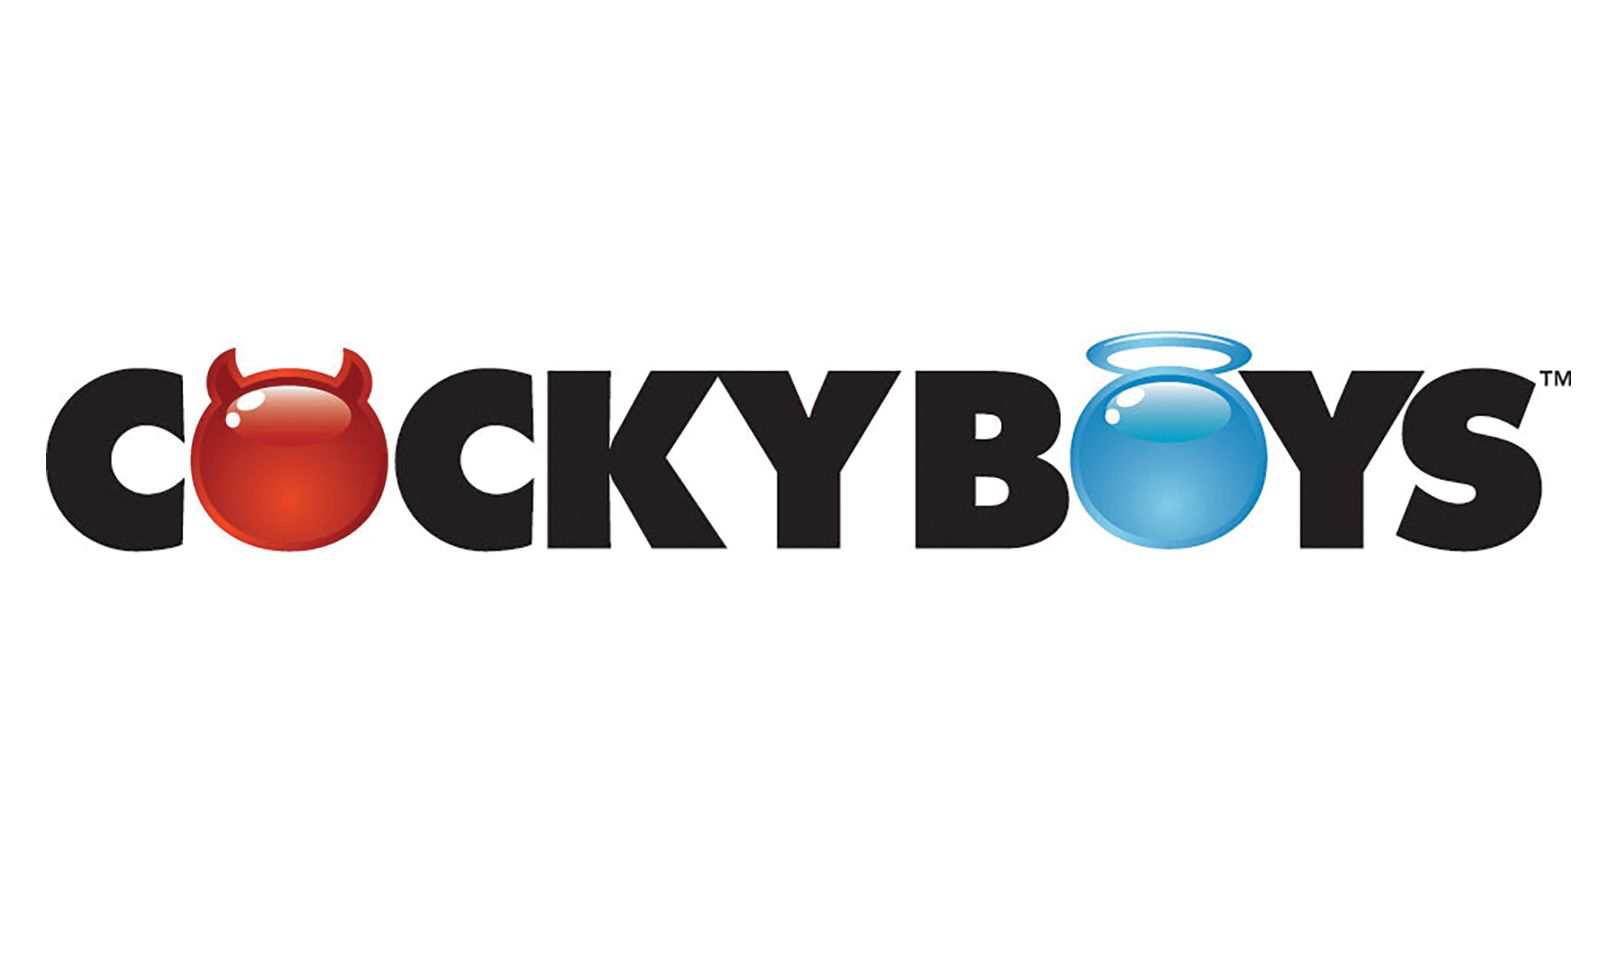 Euro Media Distribution, CockyBoys Sign Multi-Year Deal